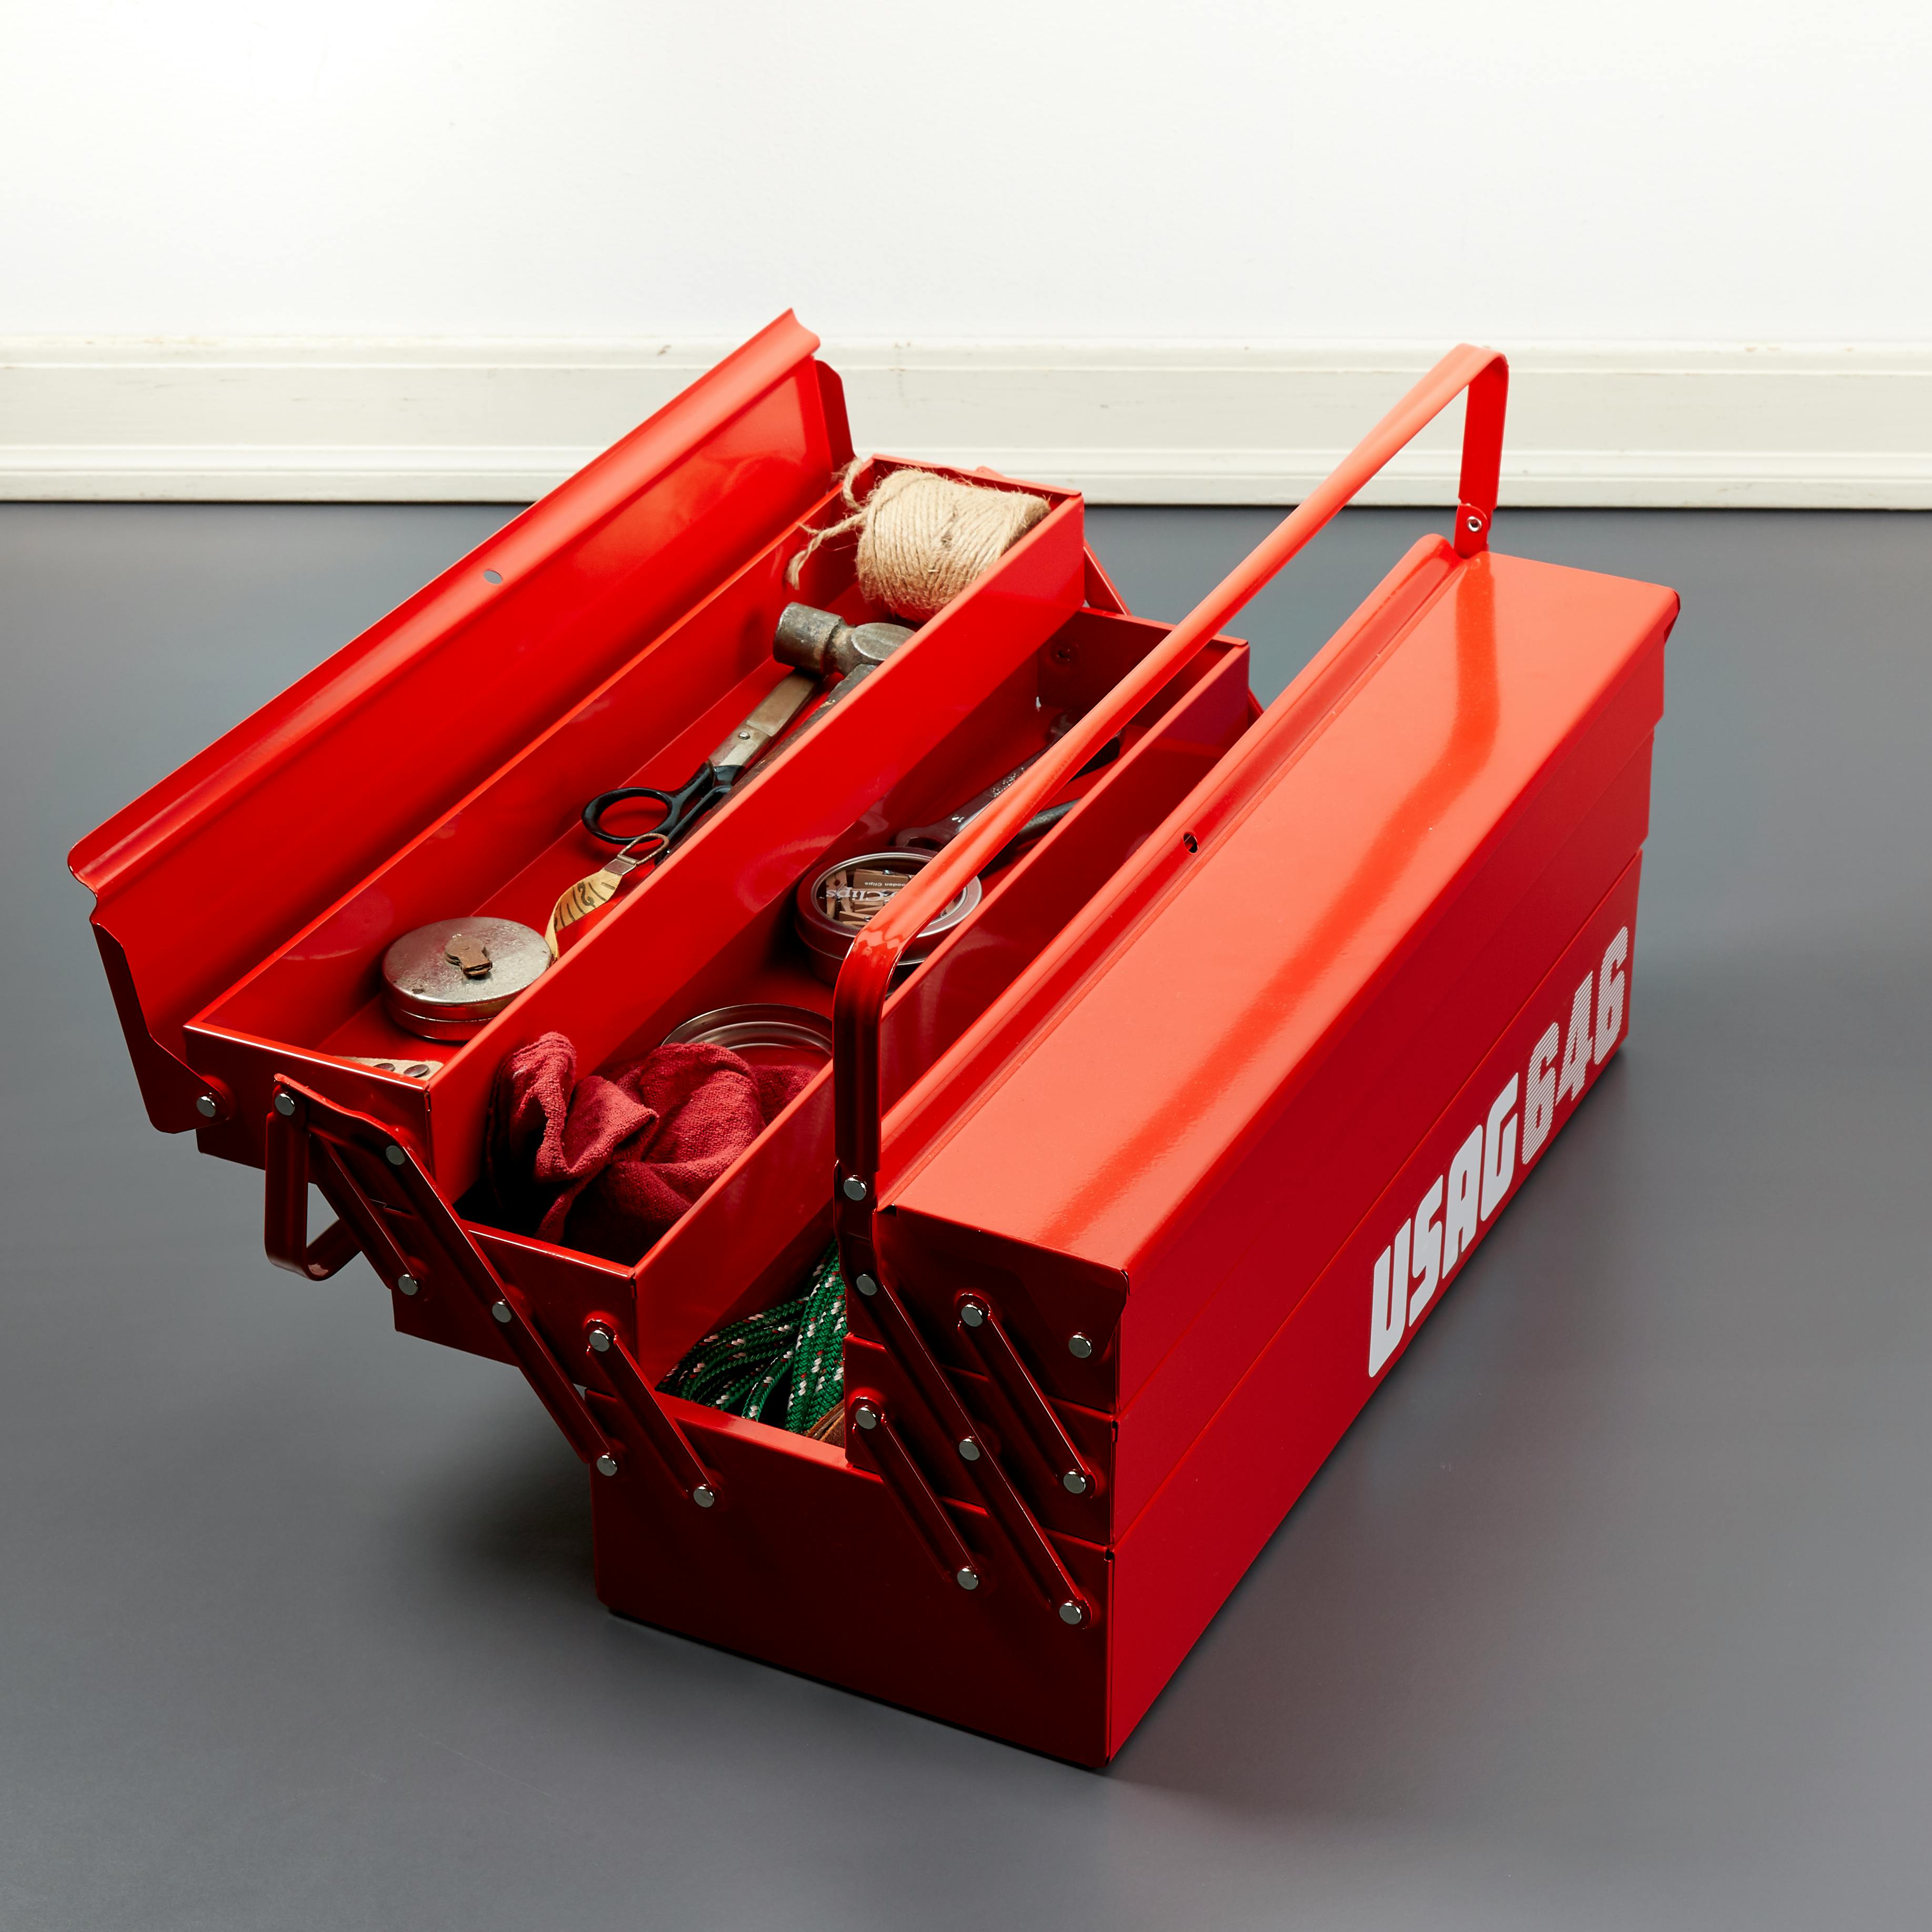 USAG Cantilever Toolbox, 5 Compartment